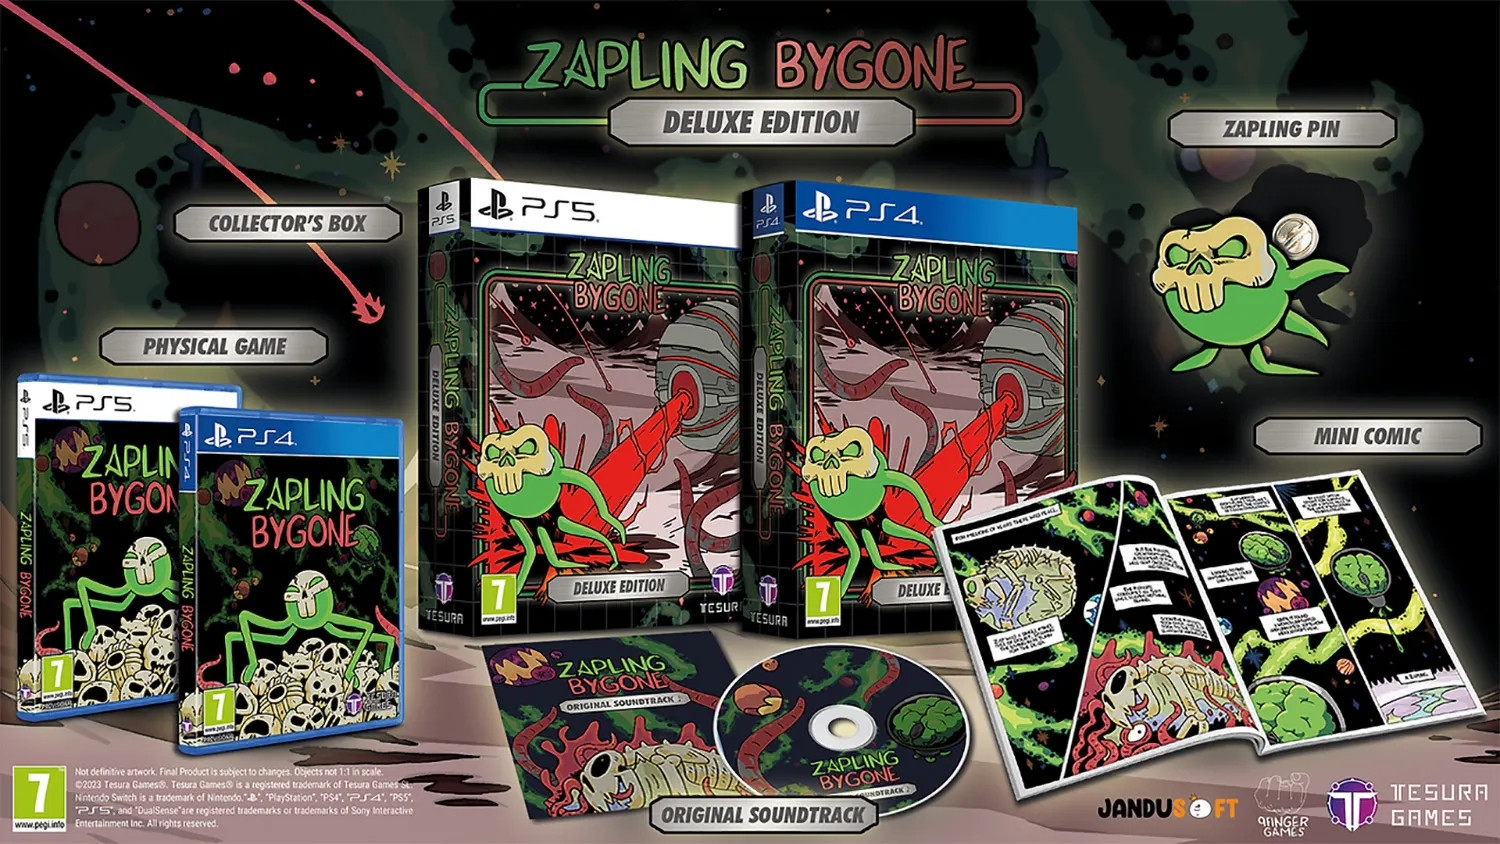 Zapling Bygone - Deluxe Edition (PS4), Tesura Games